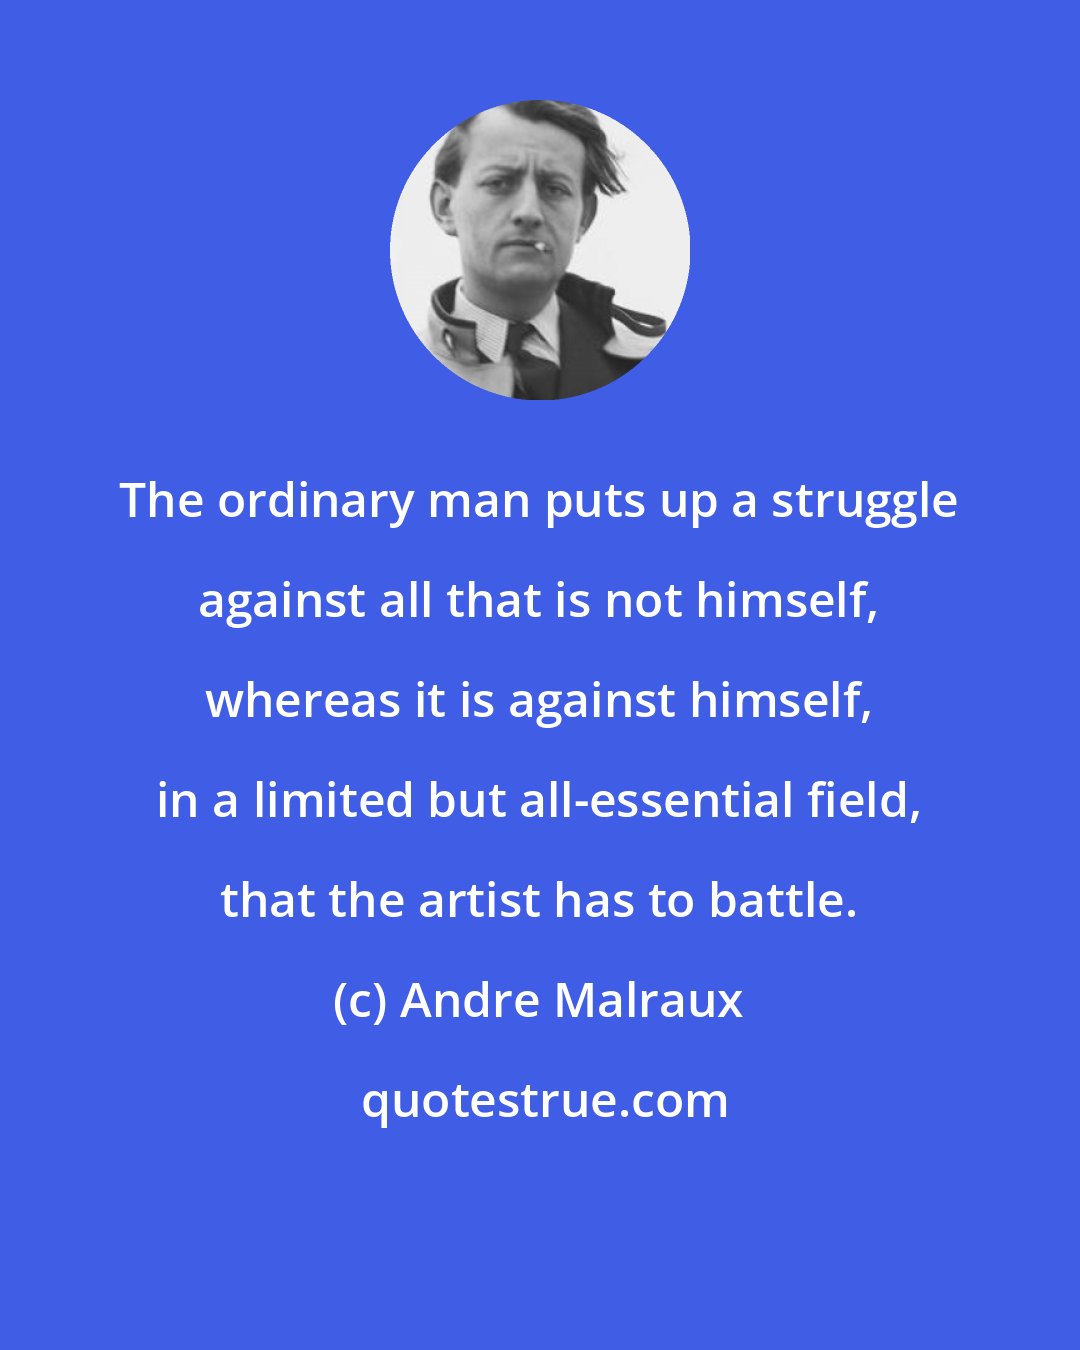 Andre Malraux: The ordinary man puts up a struggle against all that is not himself, whereas it is against himself, in a limited but all-essential field, that the artist has to battle.